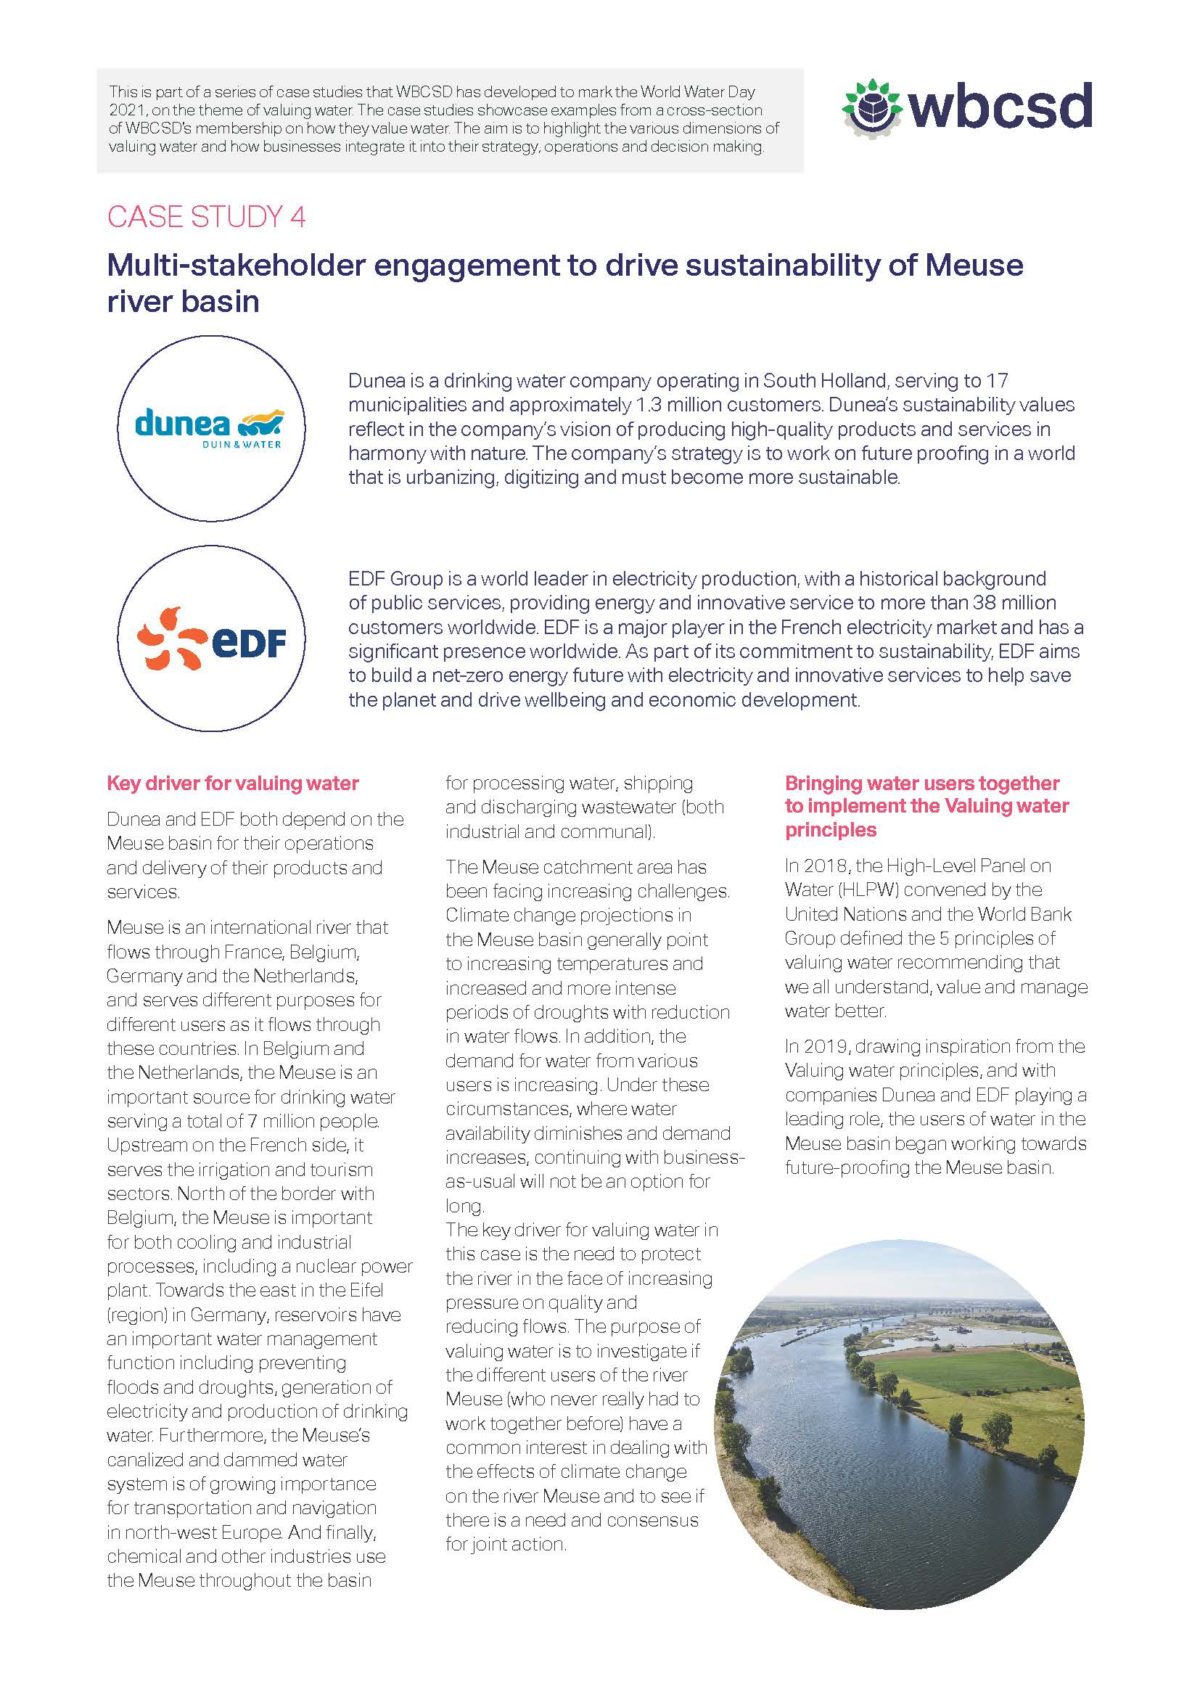 Multi-stakeholder engagement to drive sustainability of Meuse river basin